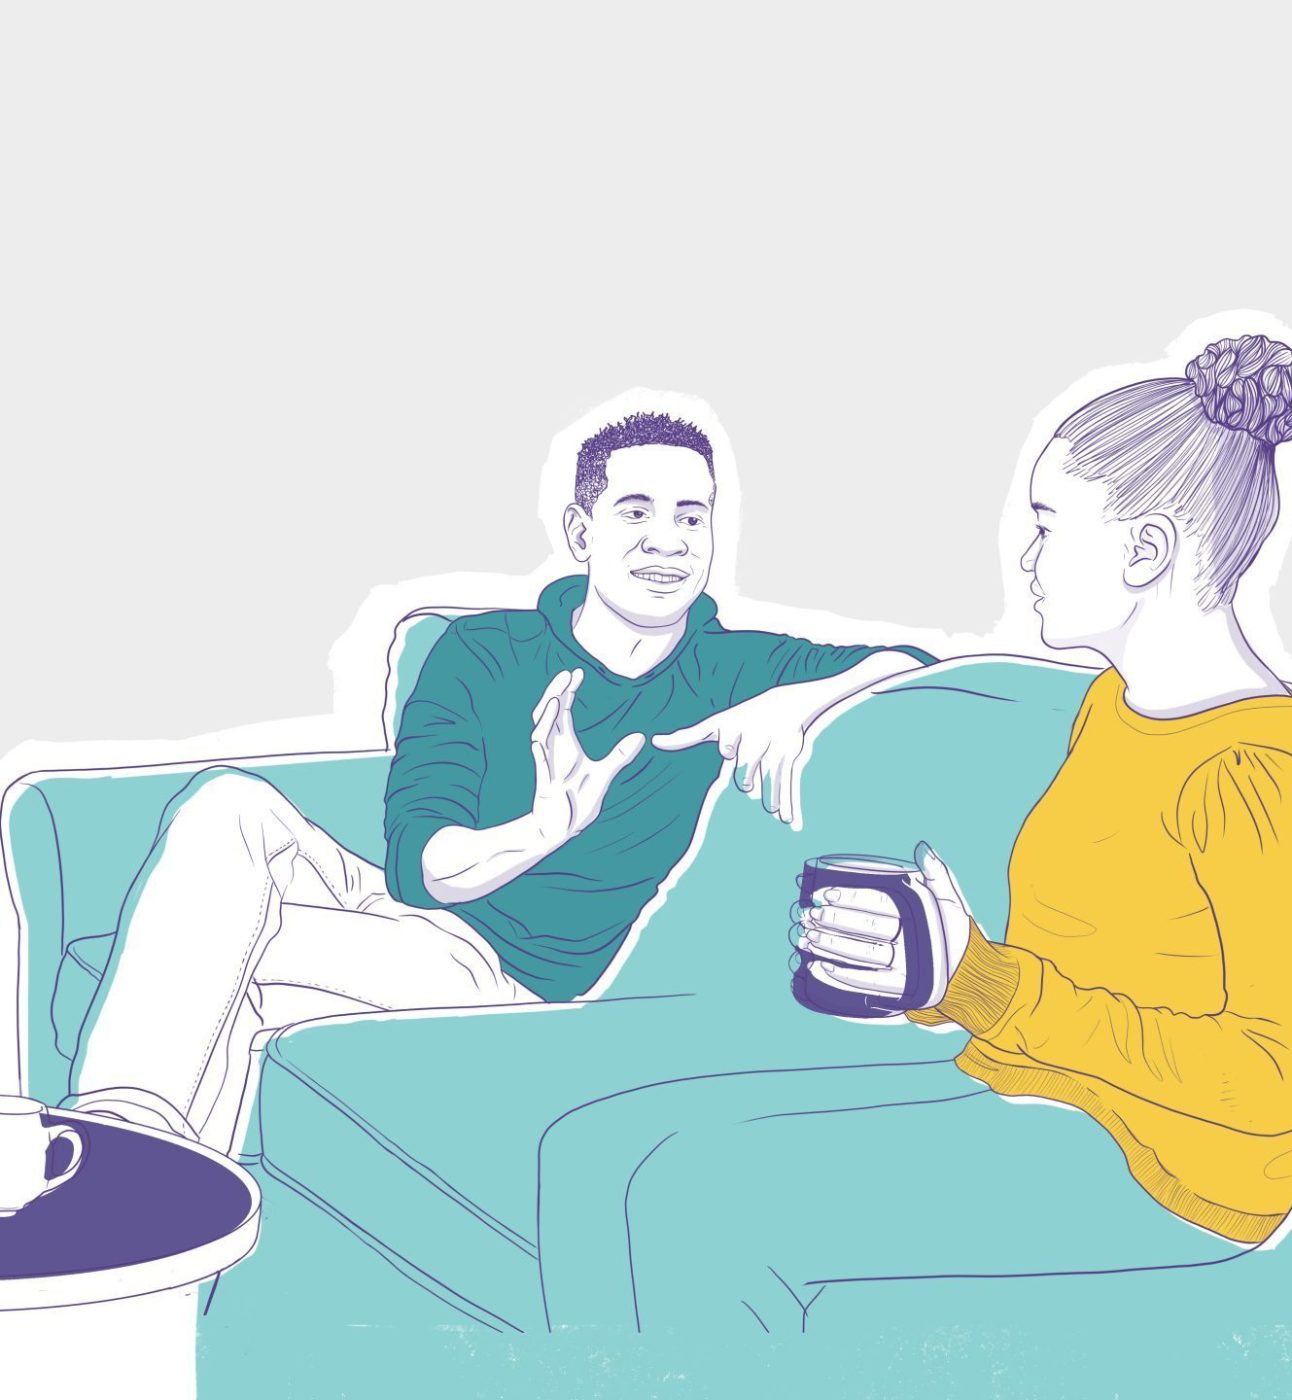 Illustration of a man and lady sitting together on a sofa talking